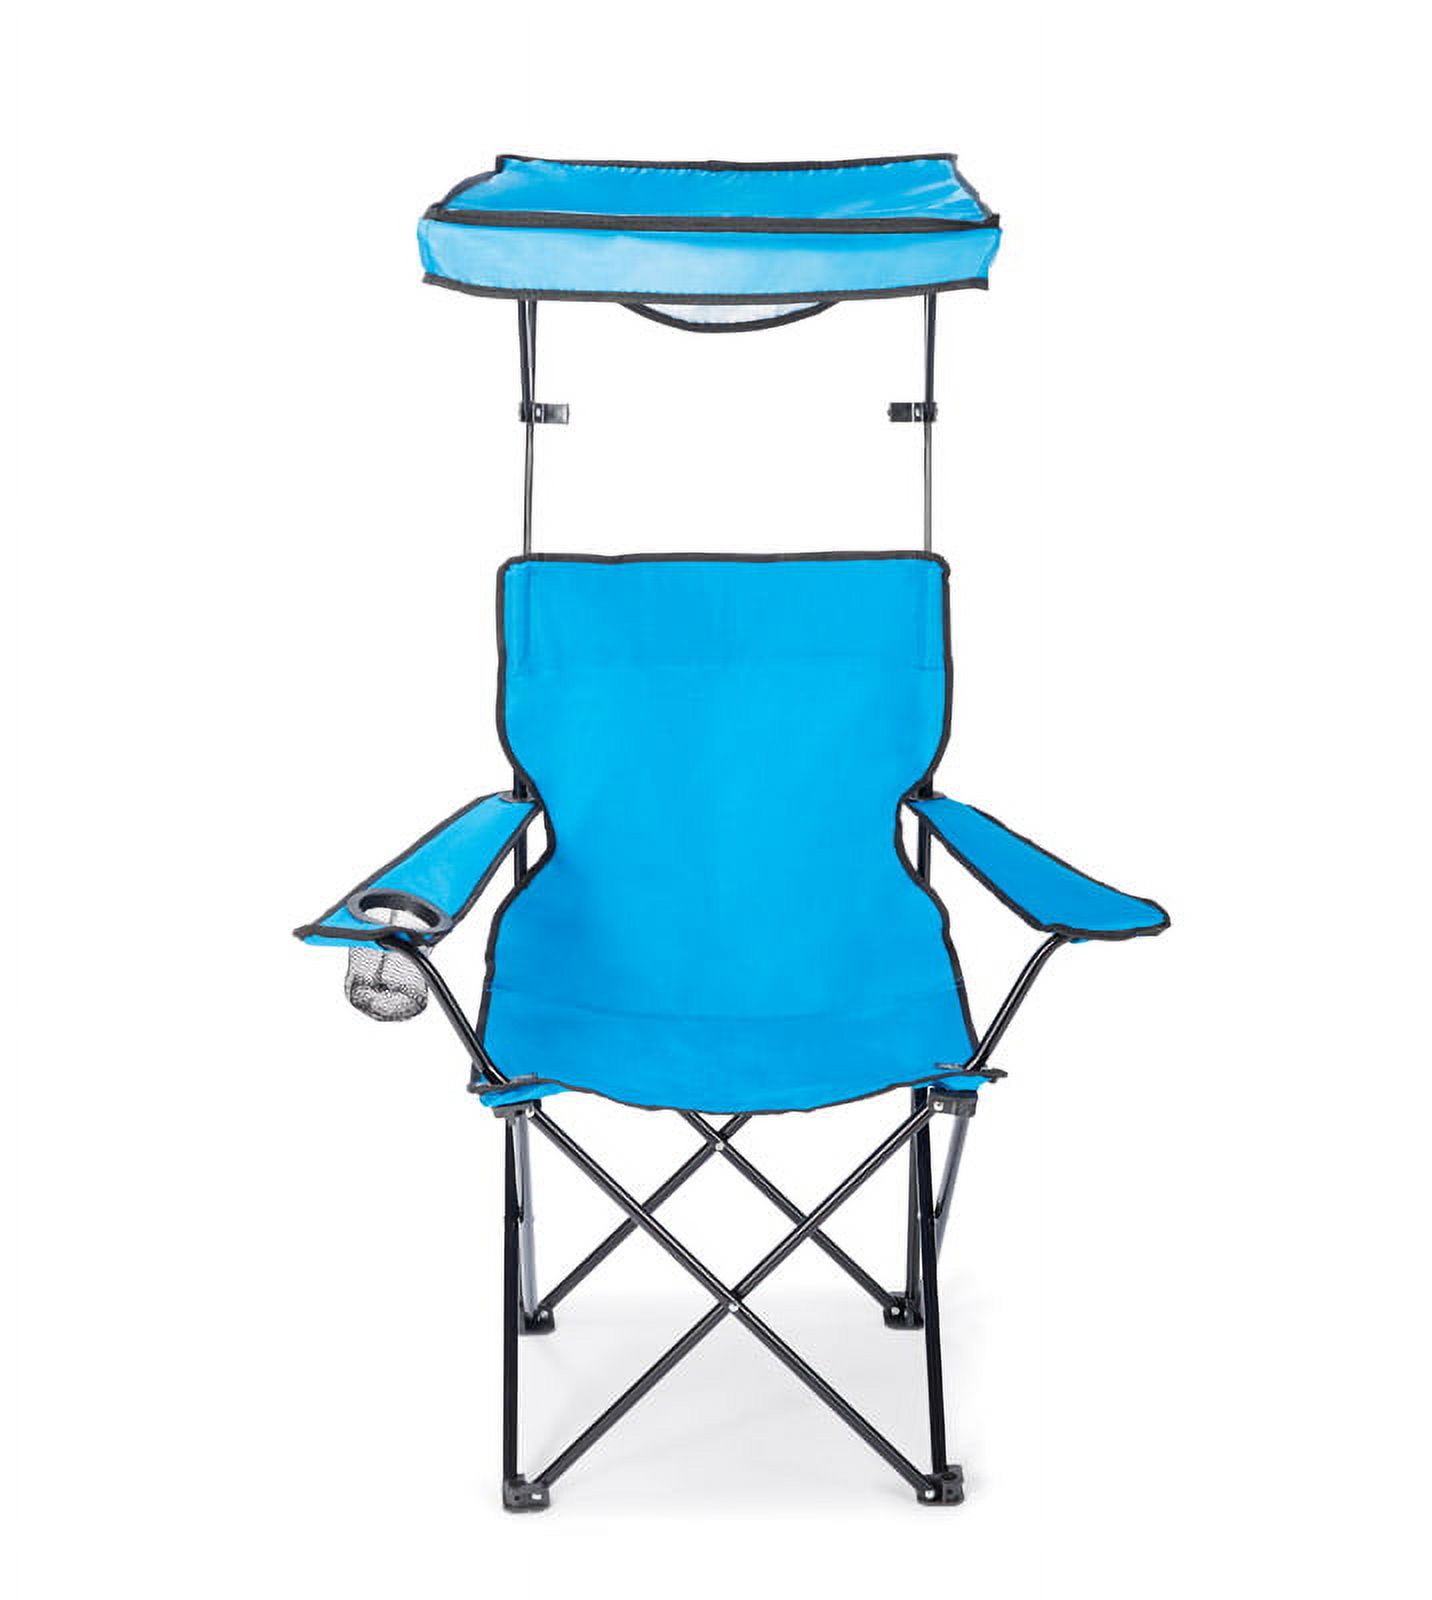 Quik Shade Basic Adjustable Blue Canopy Chair - image 2 of 4